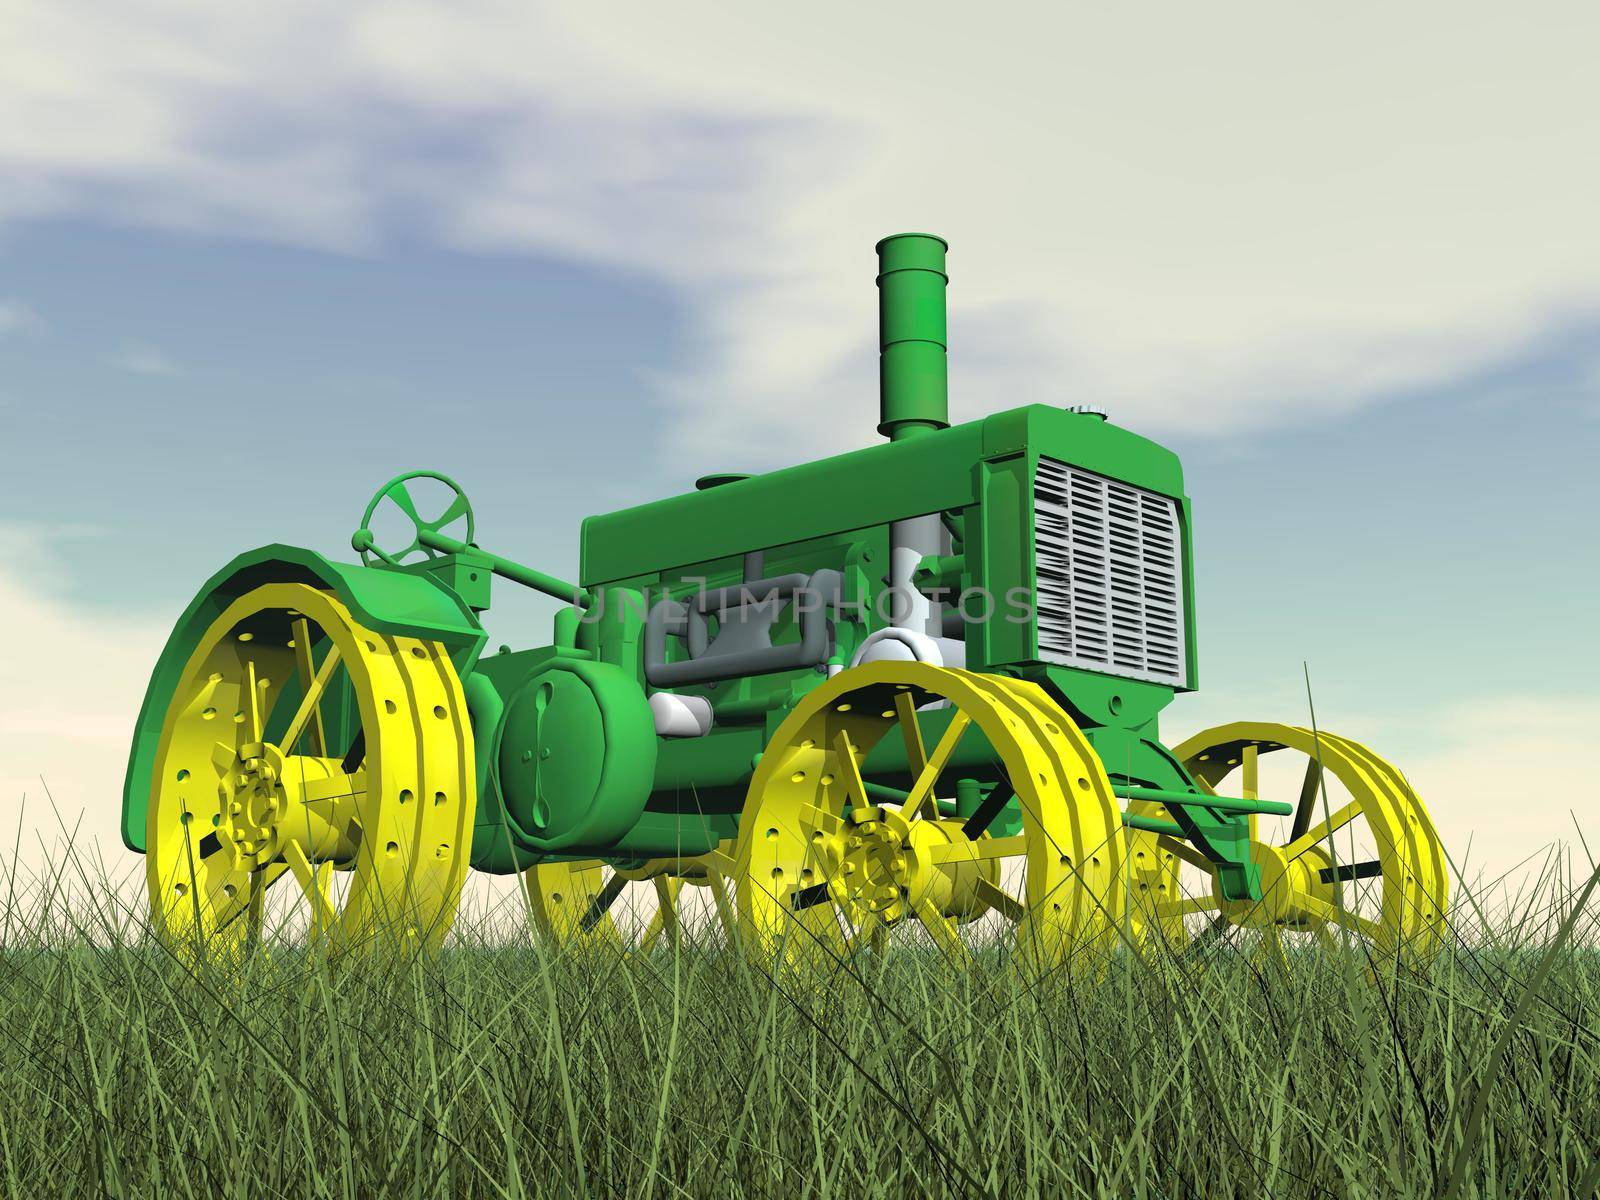 Close up of yellow and green antique tractor on grass by cloudy day